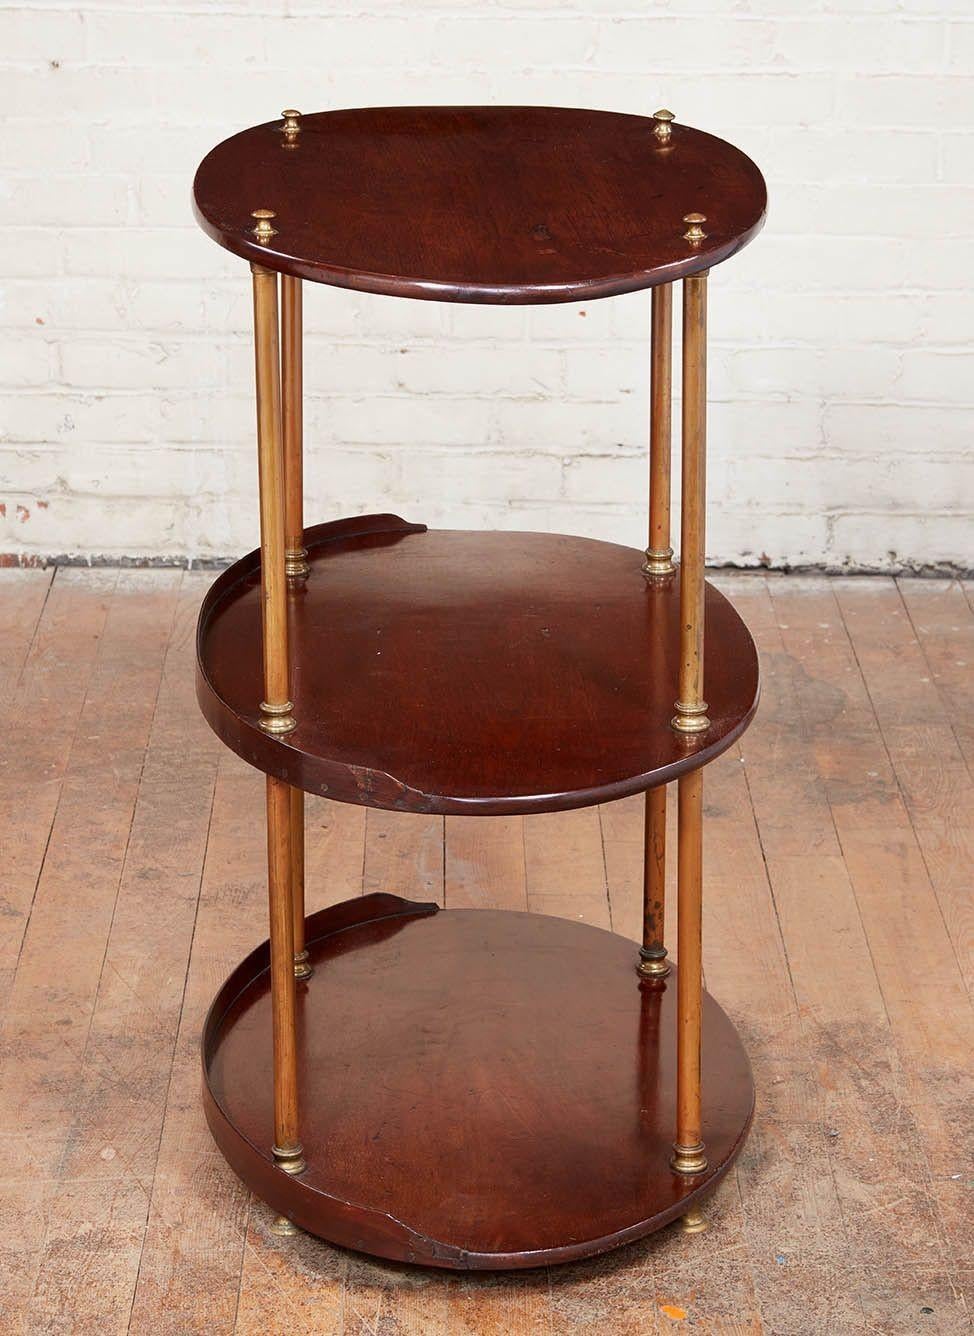 English mahogany oval campaign etagere, the three oval mahogany shelves supported by brass columns with original molded collars.